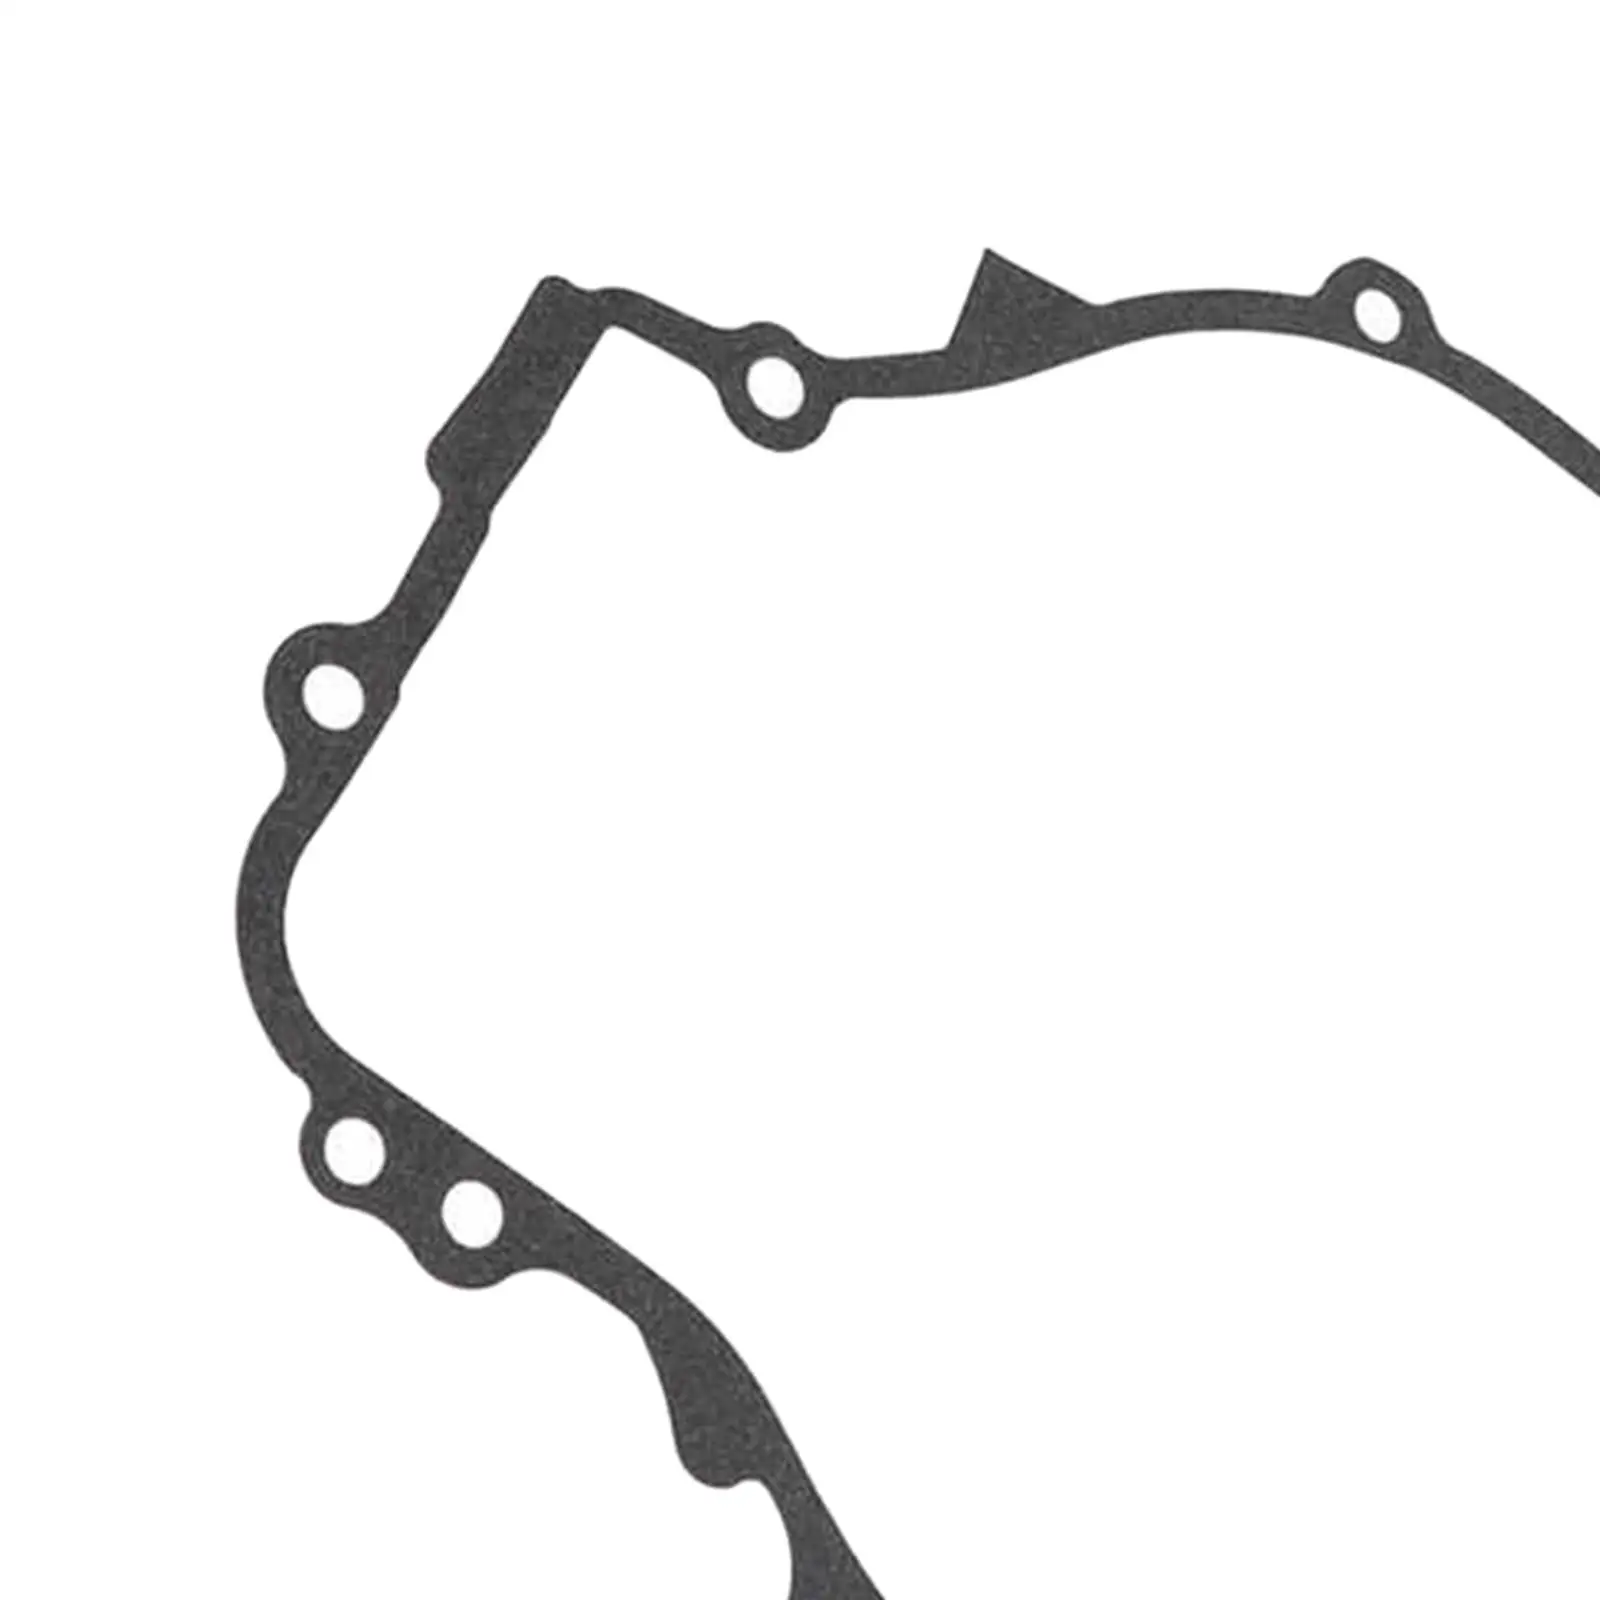 Automotive Pull Start Gasket 3084933 for Polaris Sportsman 500 Replacement Durable